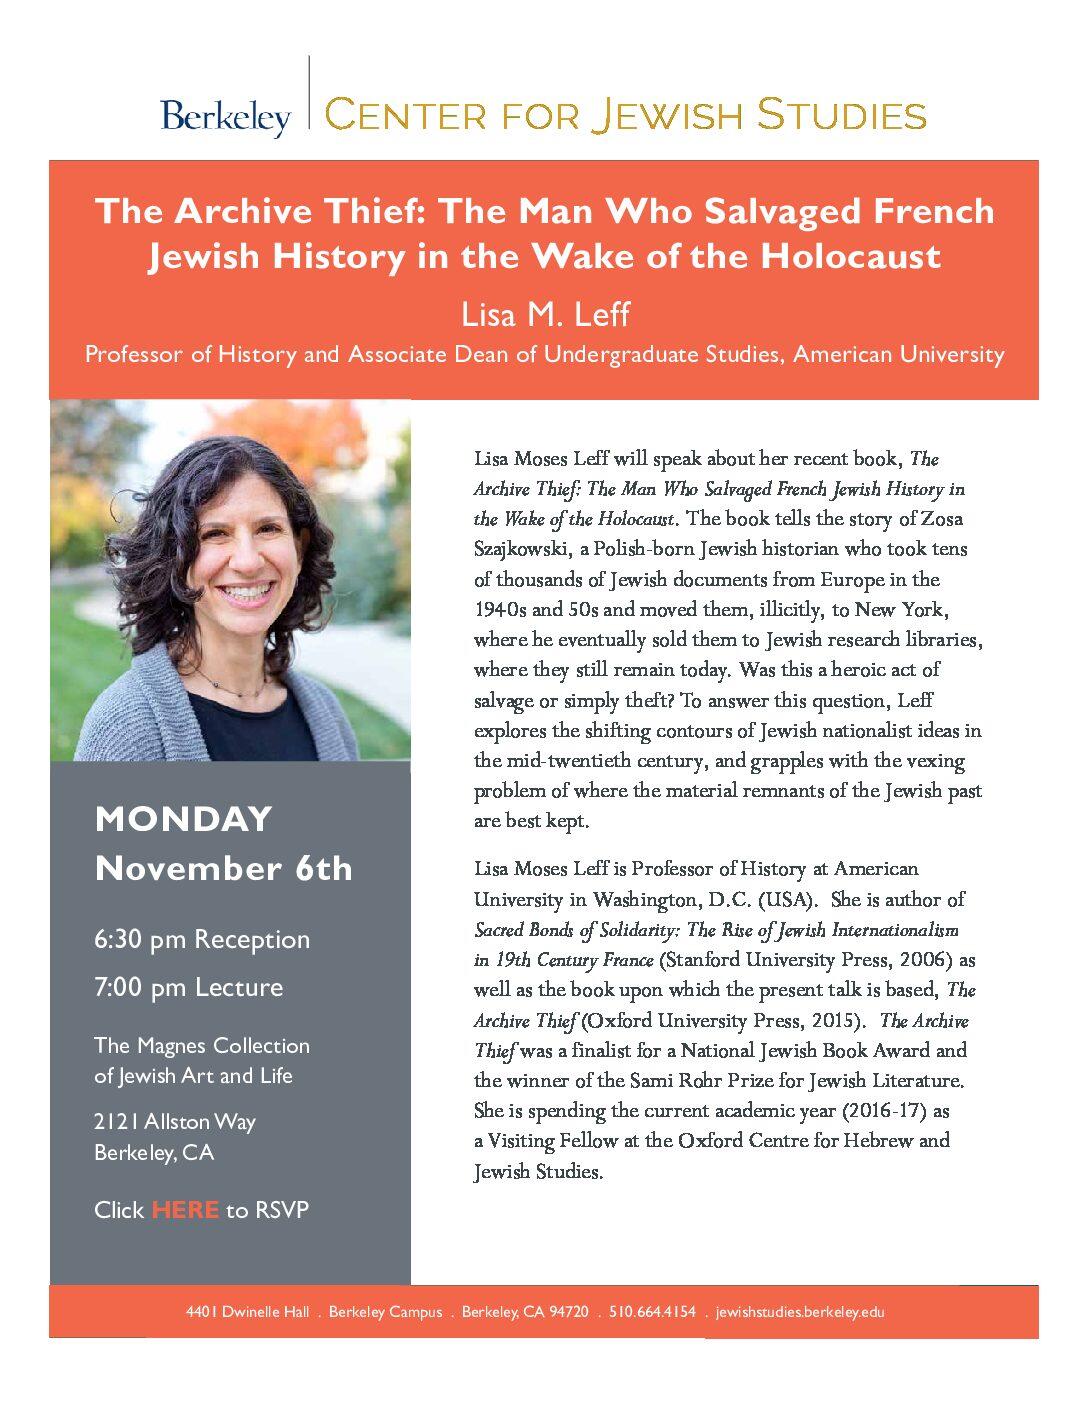 Lisa Leff–“The Archive Thief”